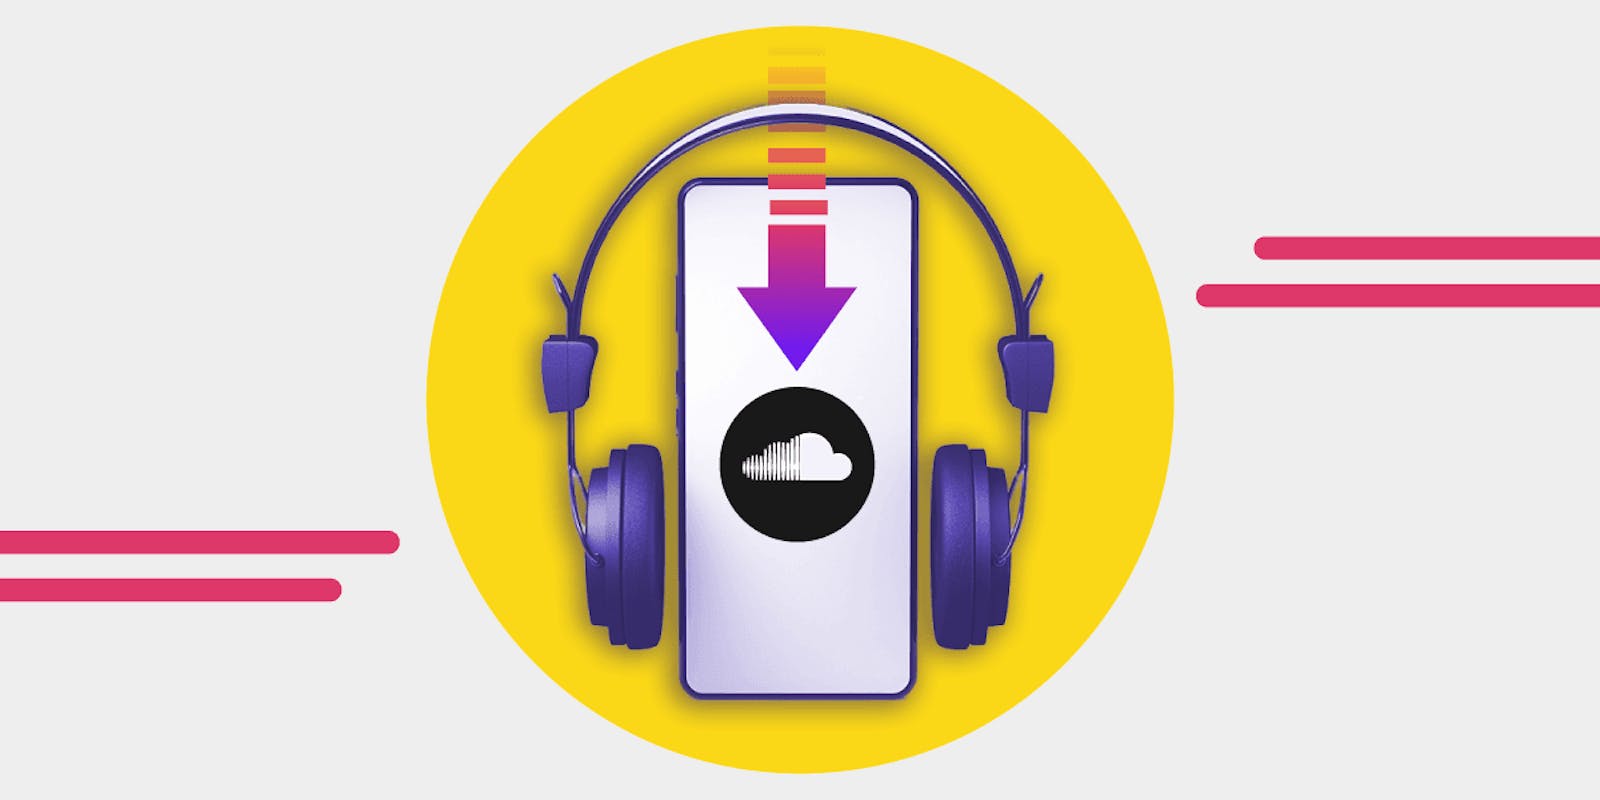 Stream Large Music music  Listen to songs, albums, playlists for free on  SoundCloud